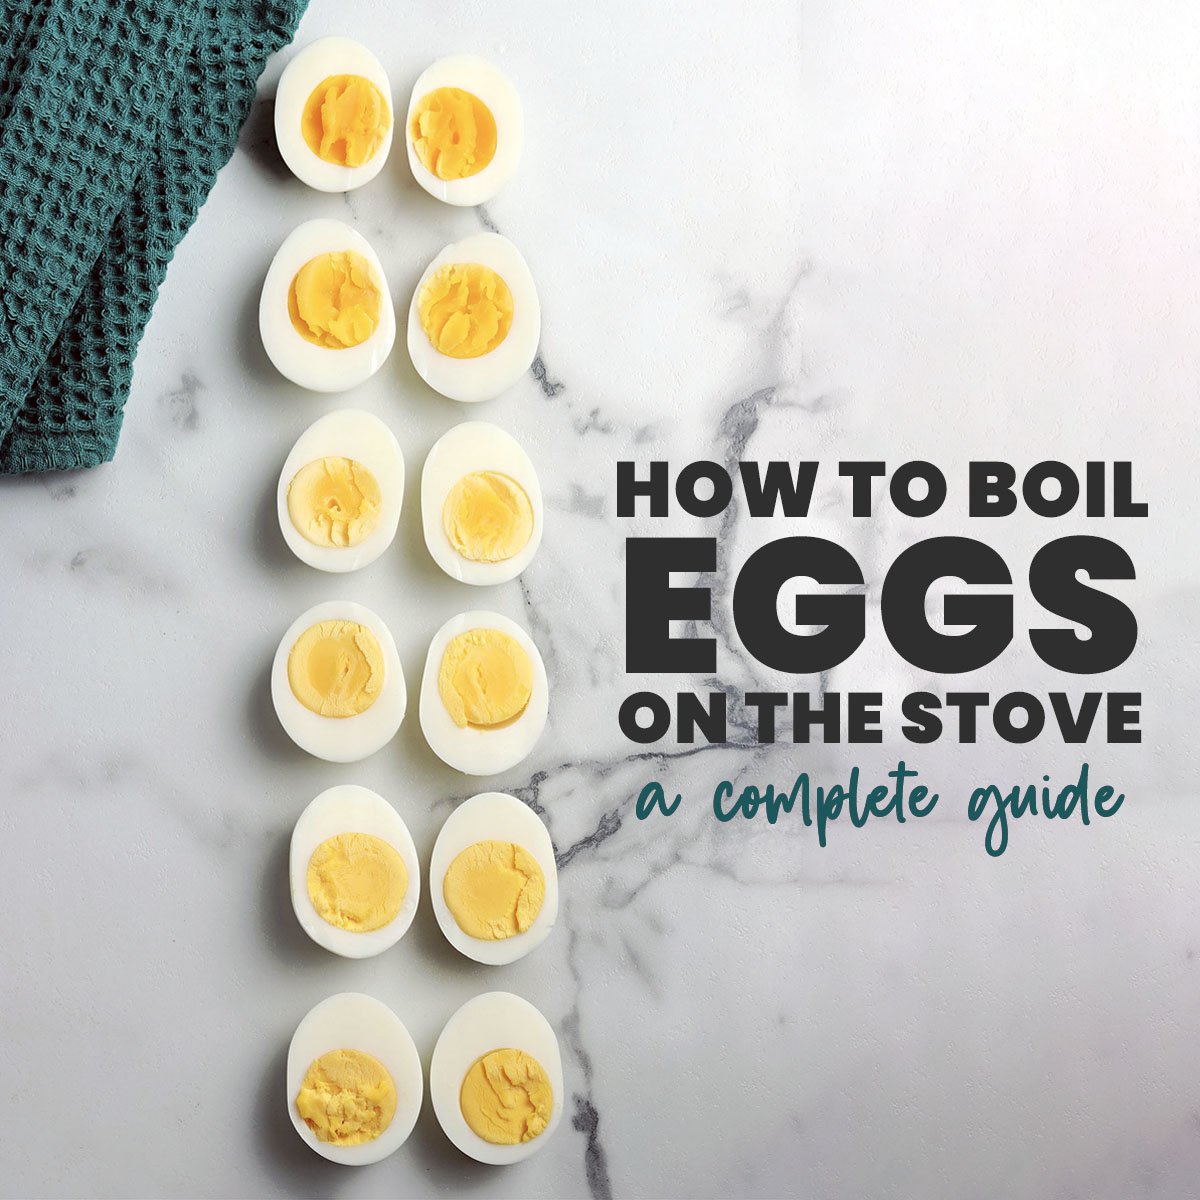 https://www.persnicketyplates.com/wp-content/uploads/2022/04/how-to-boil-eggs-on-stove-SQUARE-copy.jpg